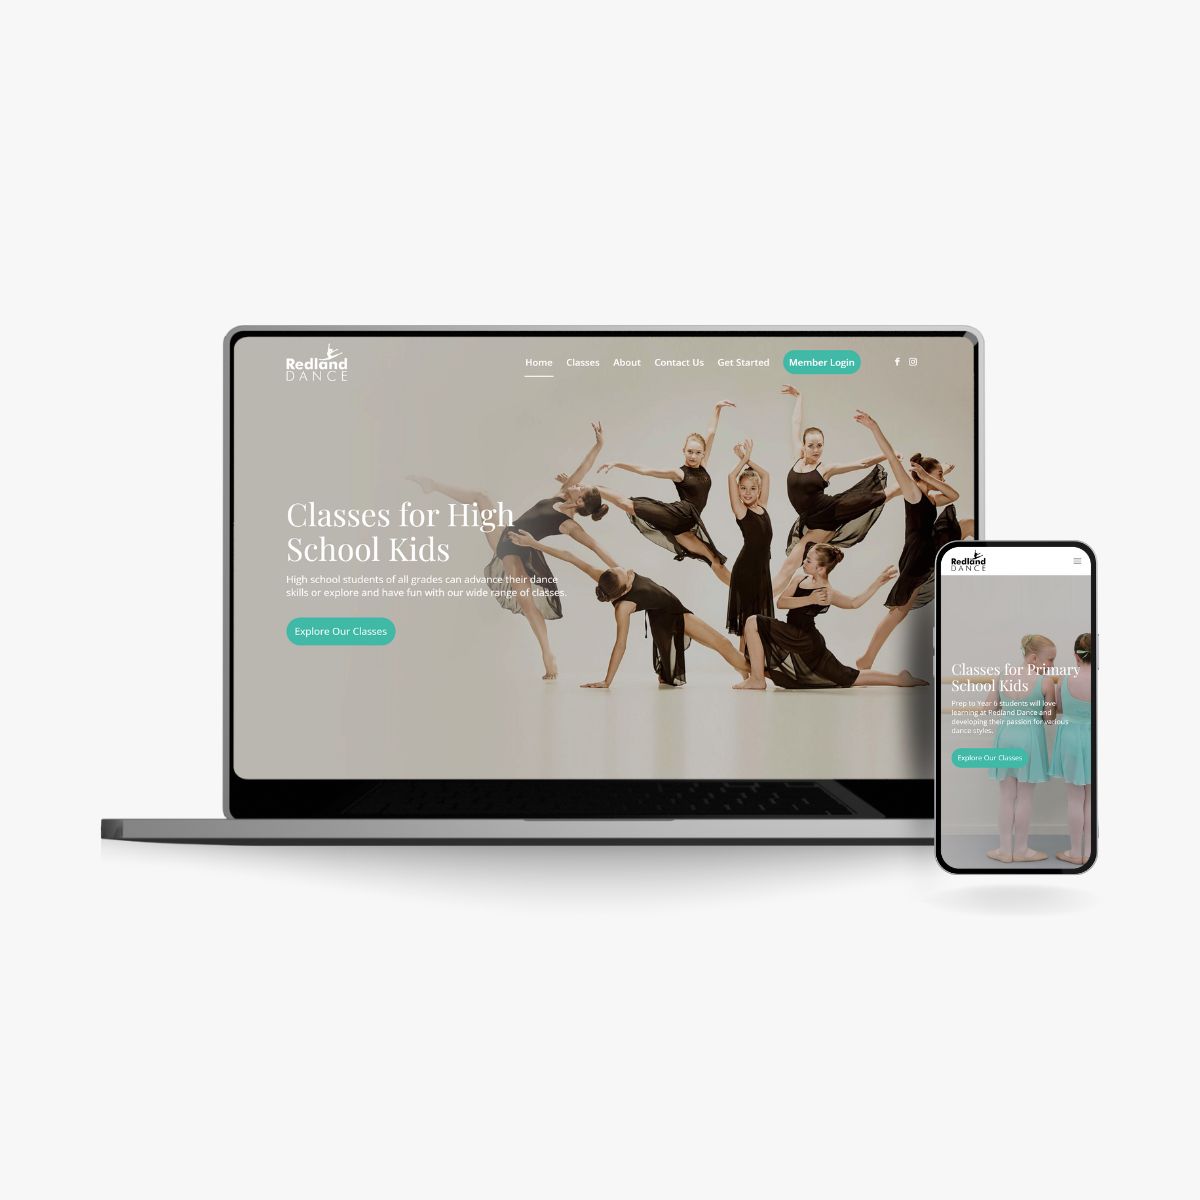 Best Website Designs for Dance and Fitness Studios - Redland Dance features a professional online presence designed for business growth.